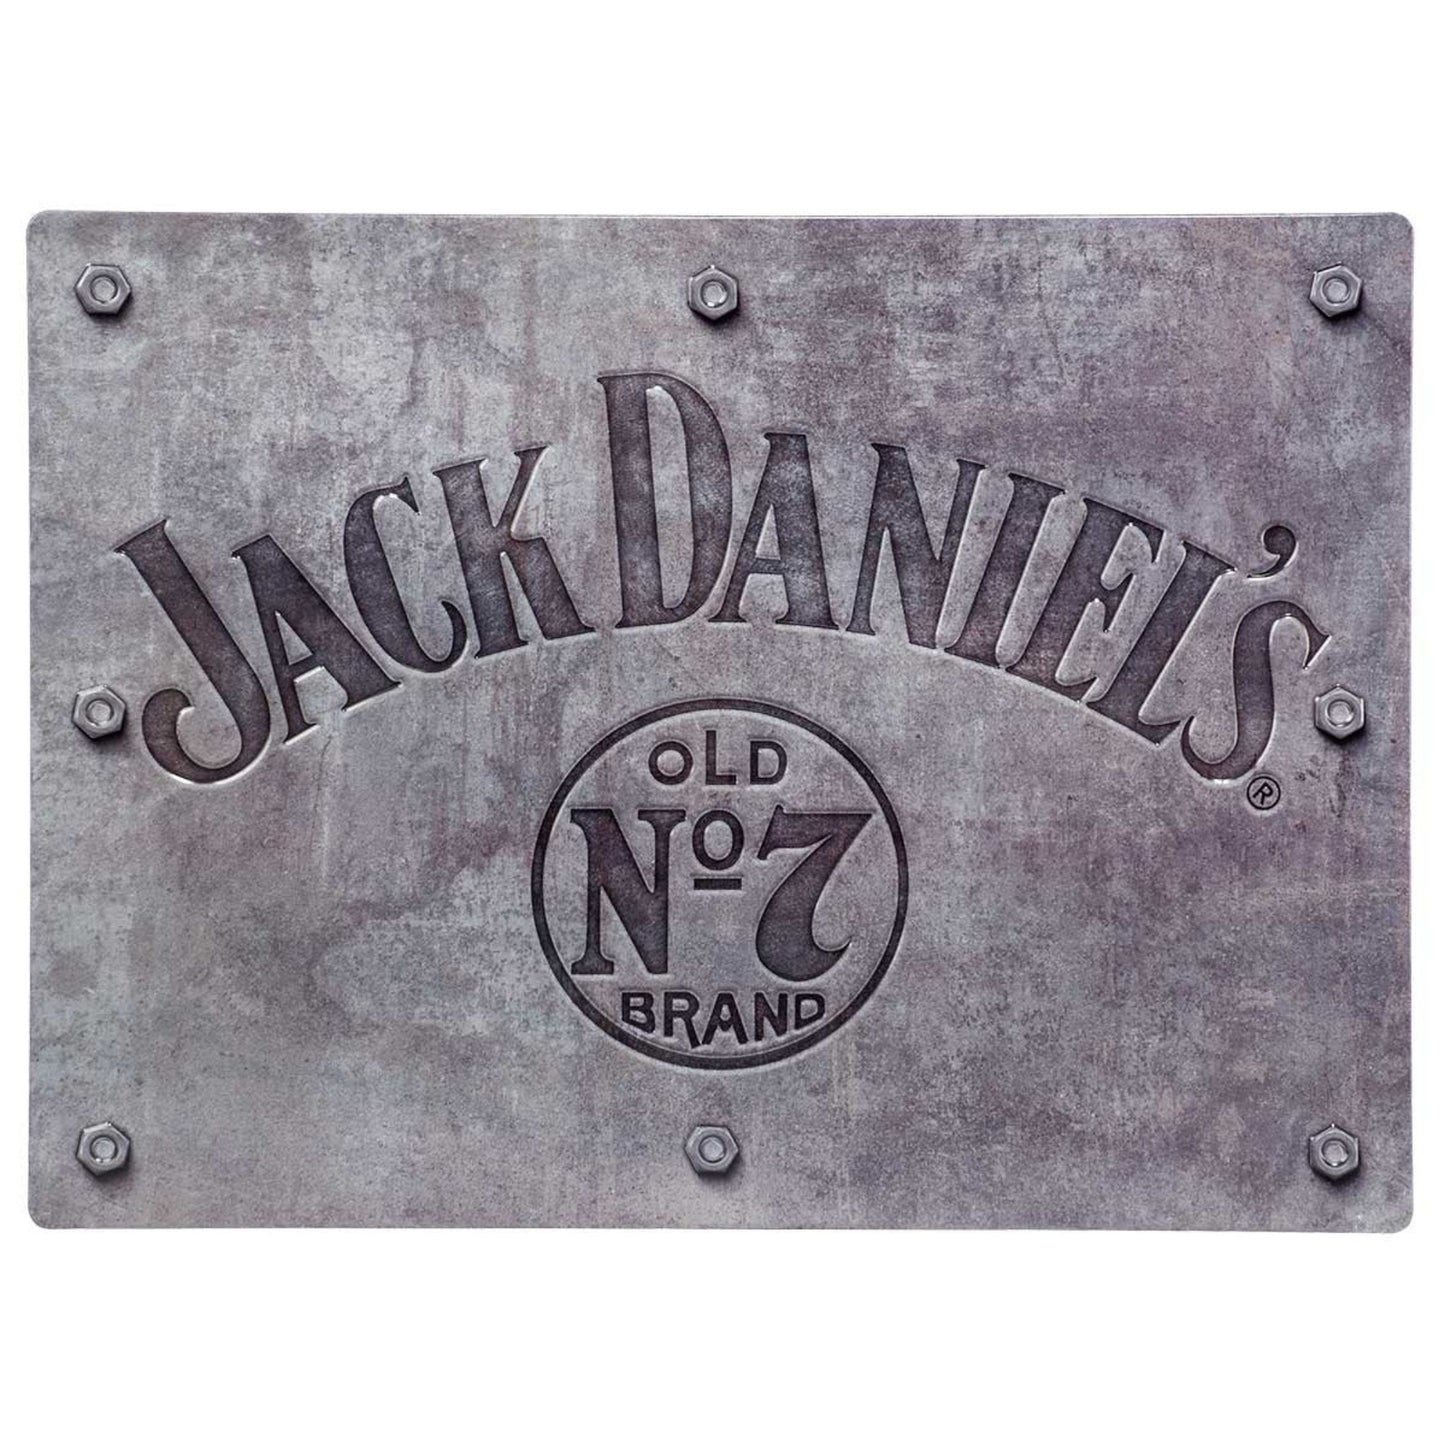 Embossed Jack Daniel's sign with 'Old No. 7 Brand' logo on a distressed metal background.